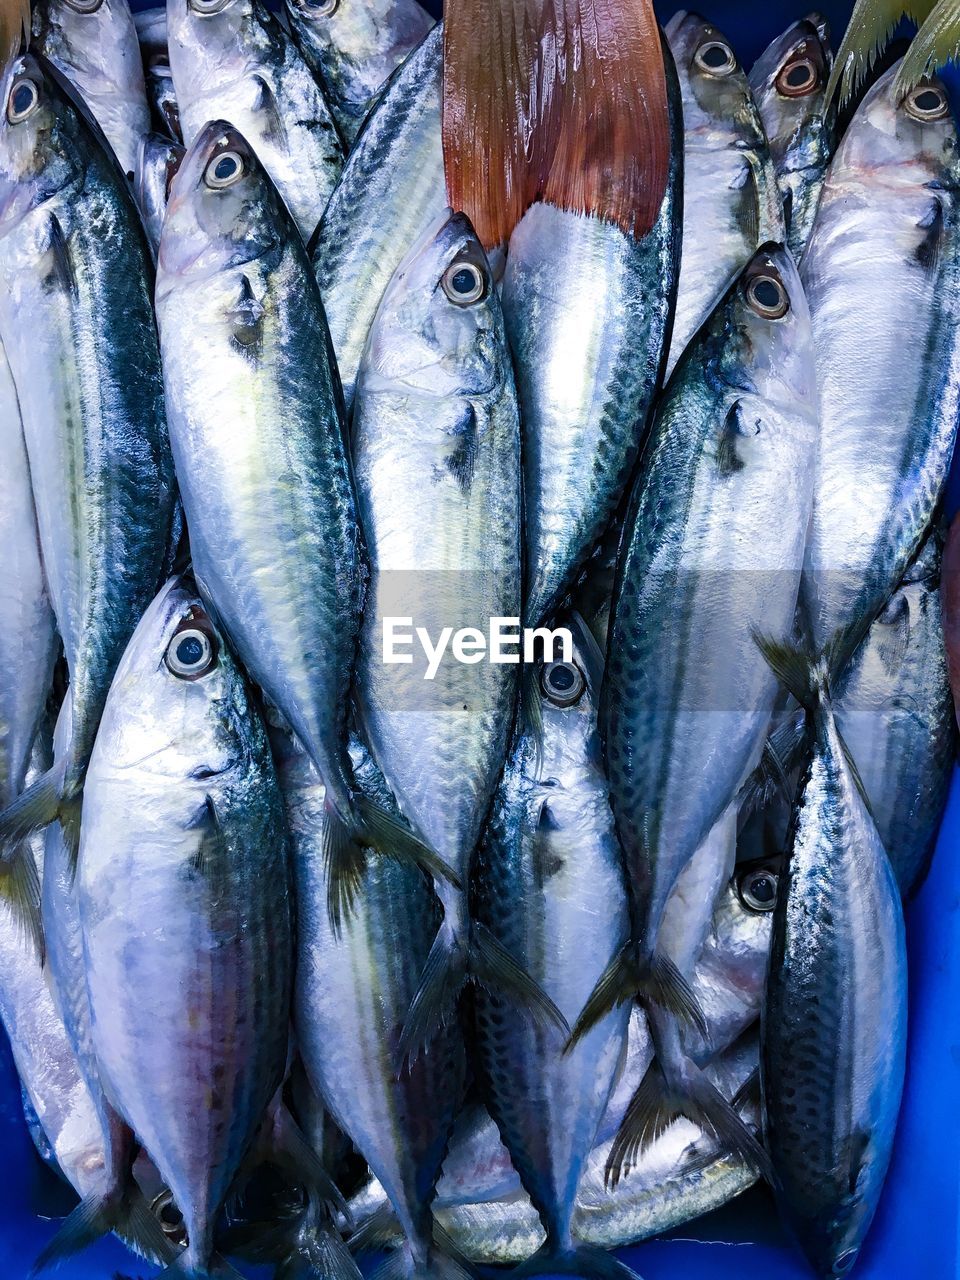 CLOSE-UP OF FISH FOR SALE AT MARKET